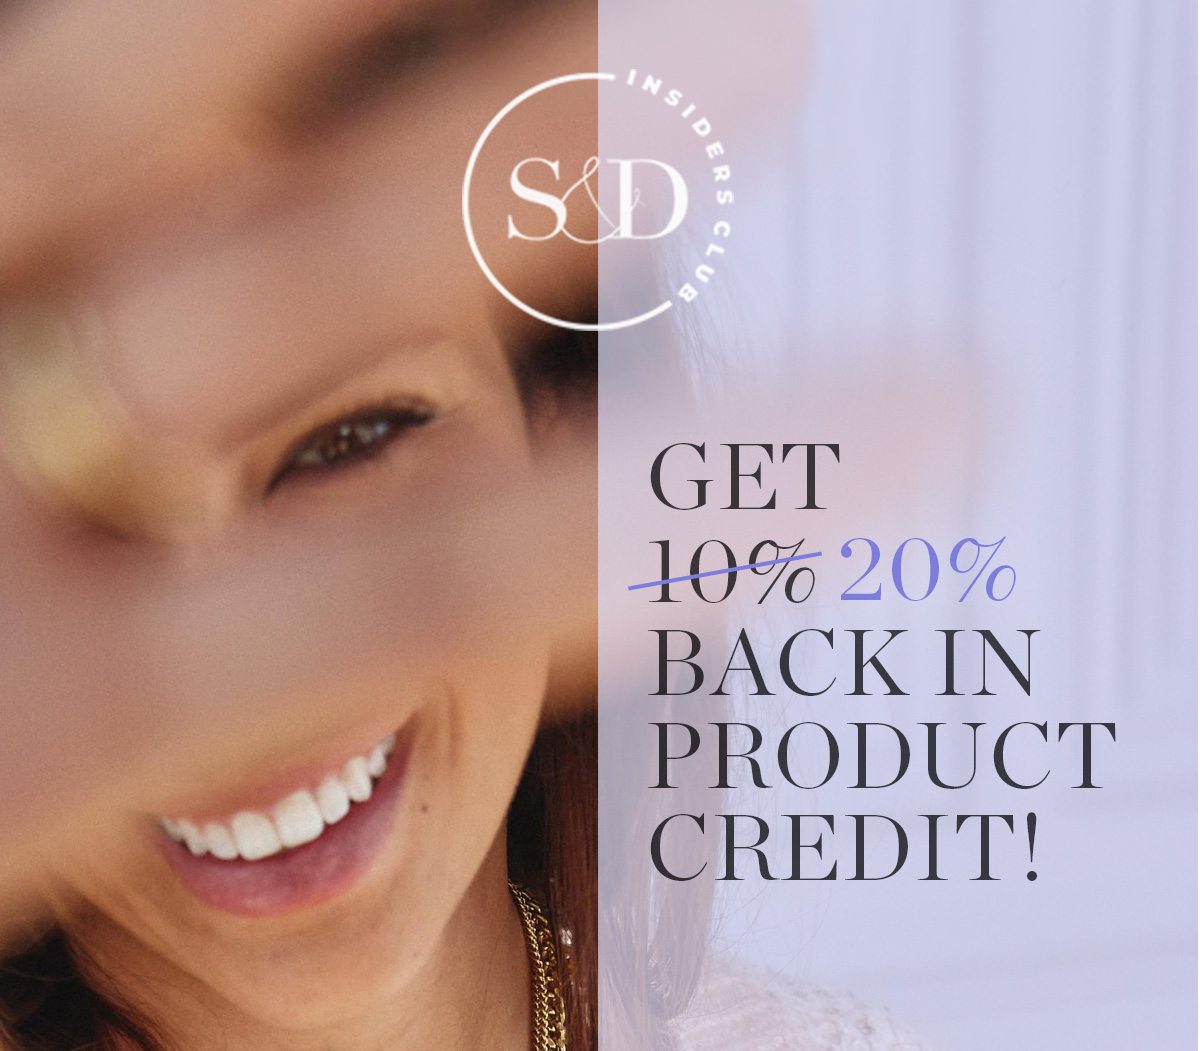 GET 20% BACK IN PRODUCT CREDIT!